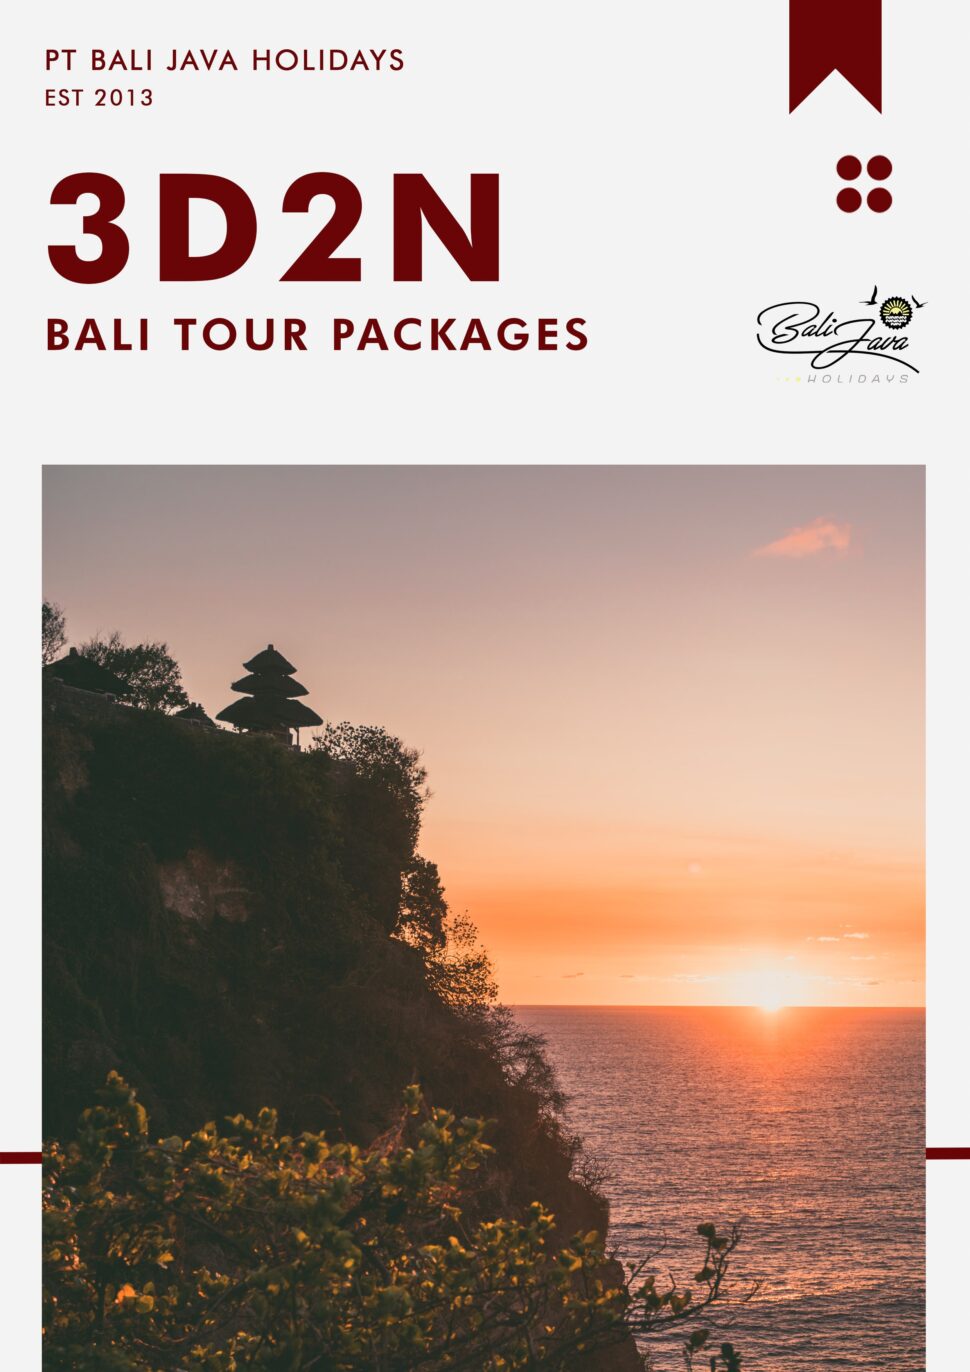 bali tour package makemytrip